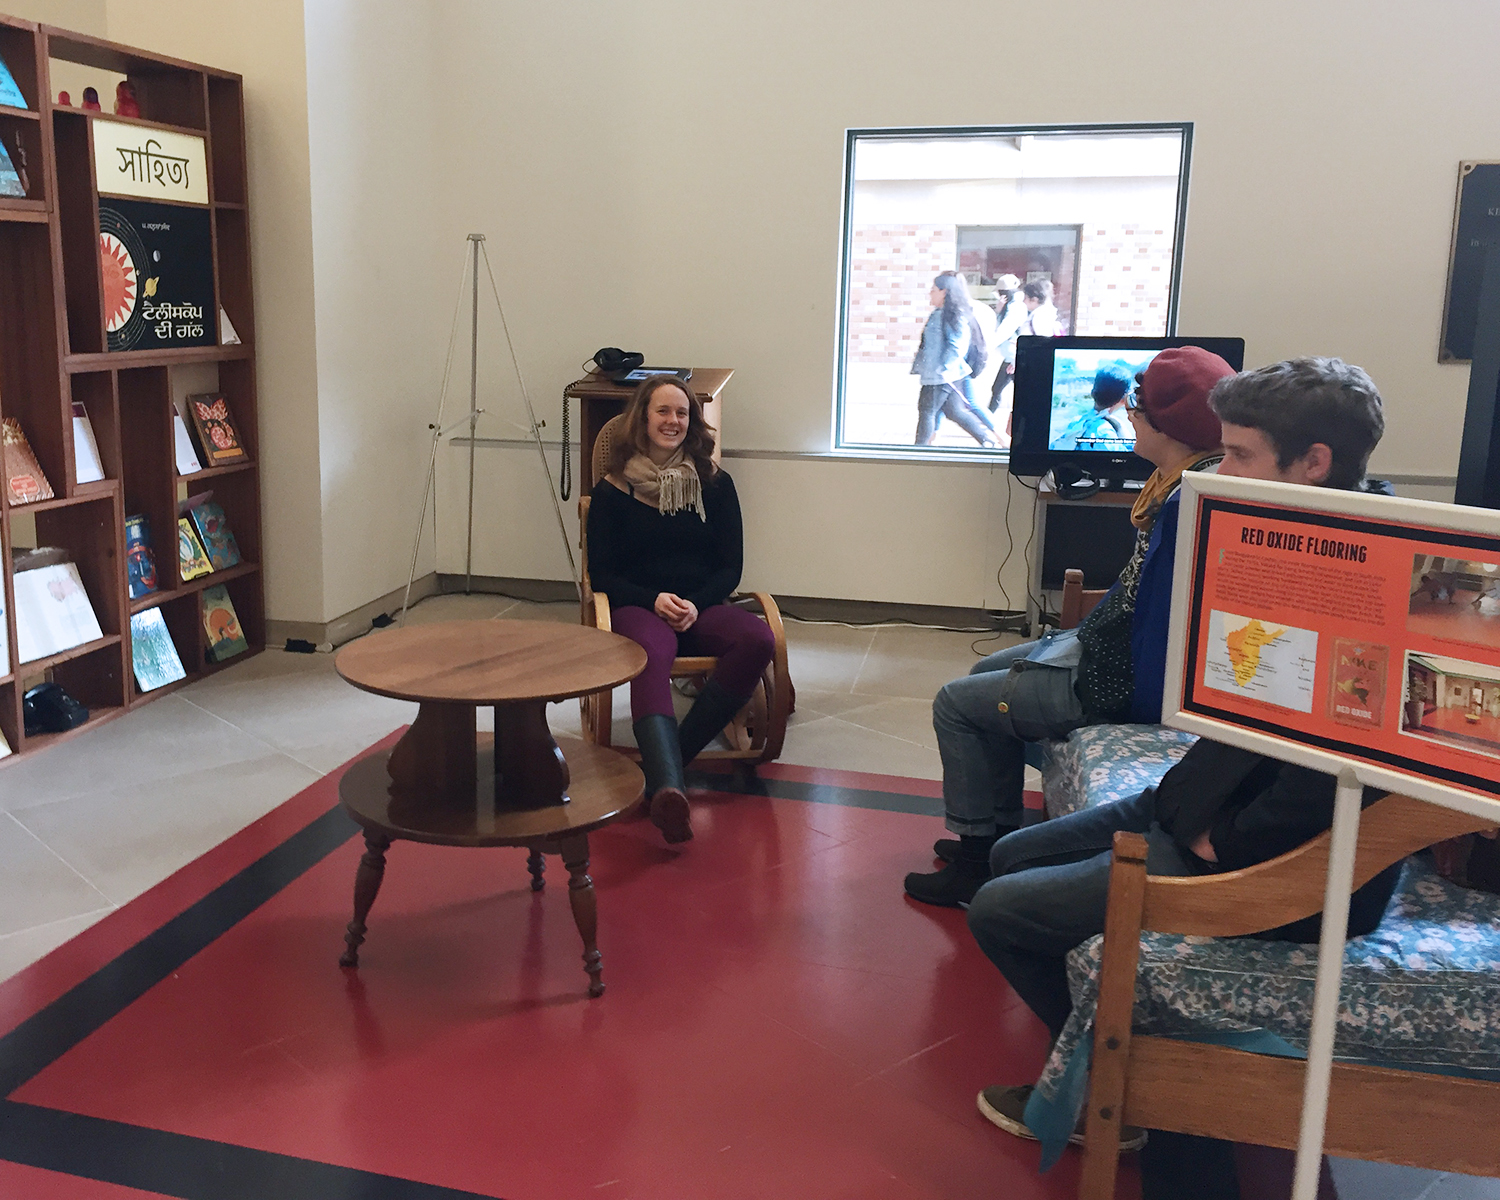 The exhibit features oral histories of those who helped build and sustain the networks of Indo-Soviet literary and cinematic exchange. The interviews, which play on the television in the background, were filmed and produced by exhibit curator Jessica Bachman and documentary filmmaker Emma Hinchliffe.